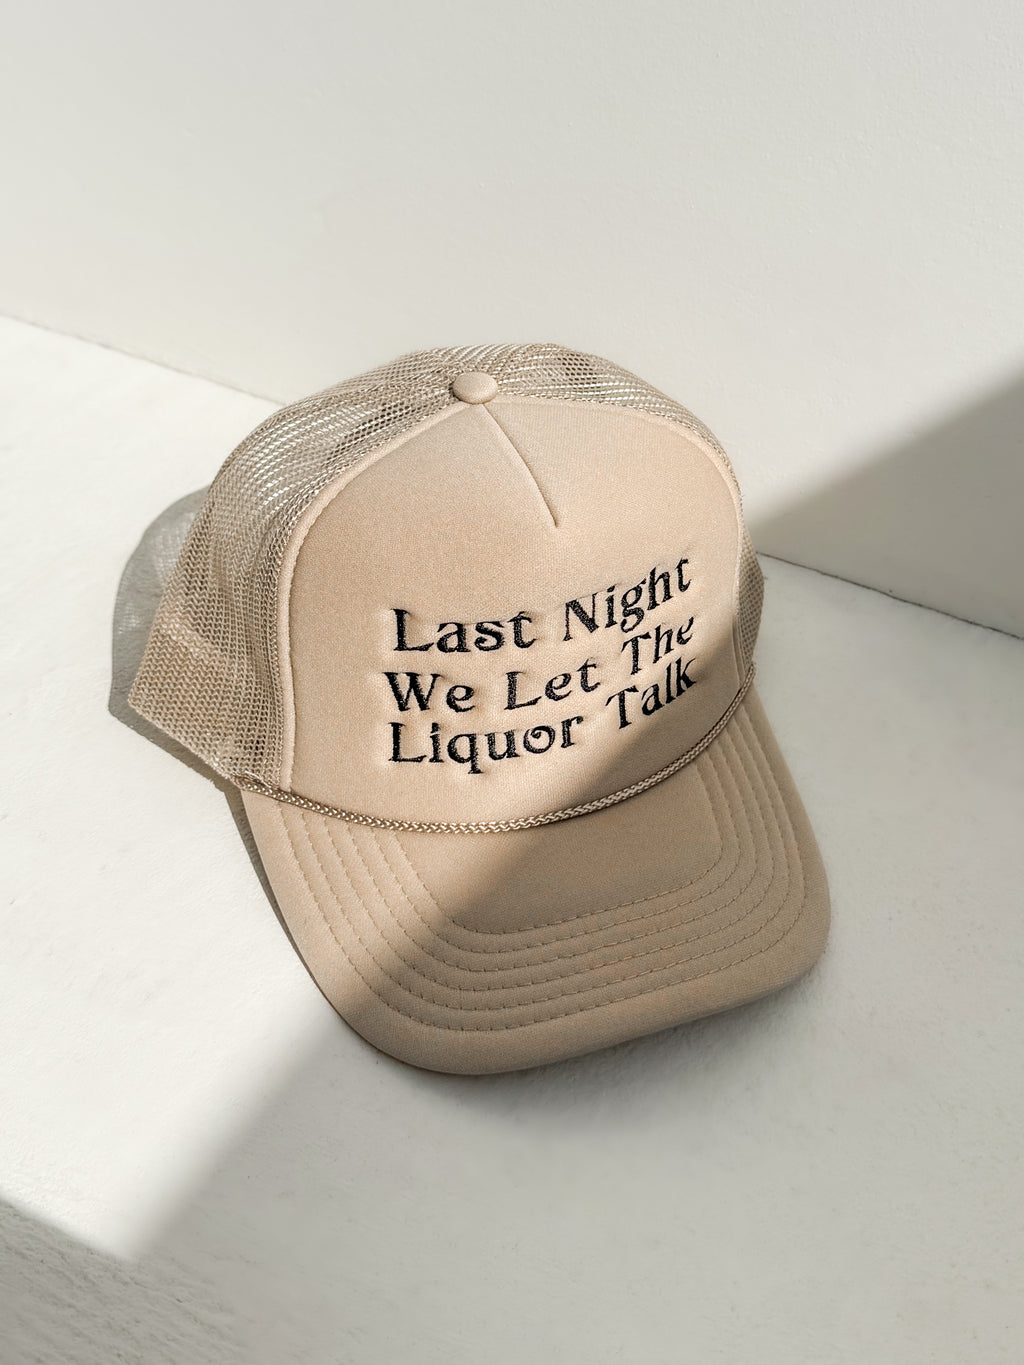 Last Night The Liquor Talked Trucker Hat - Stitch And Feather